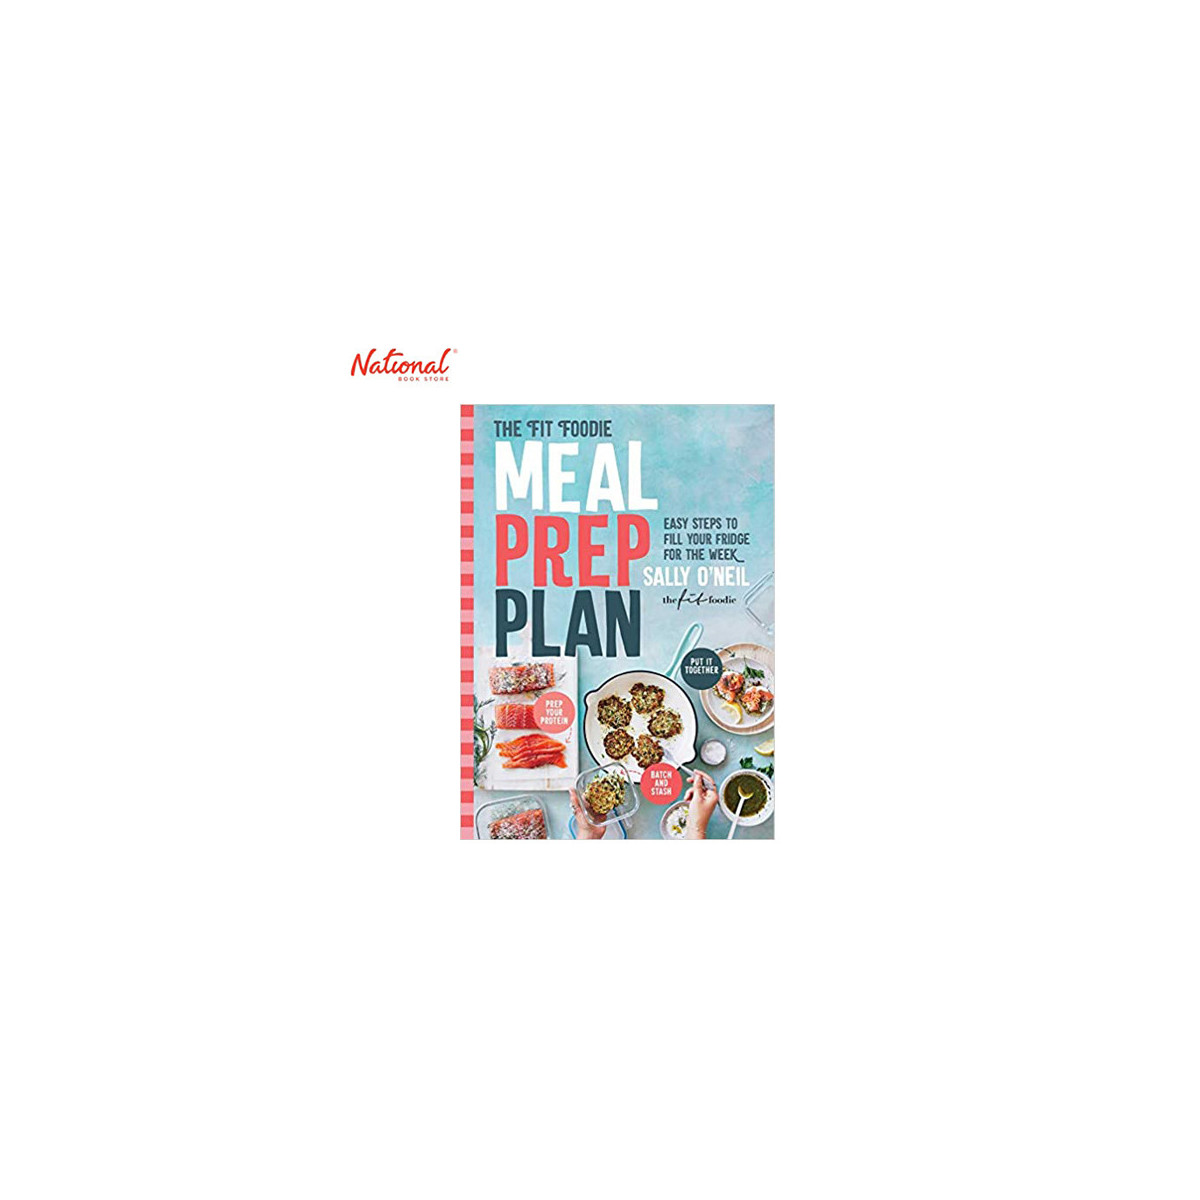 The Fit Foodie Meal Prep Plan Paperback by Sally O'Neil